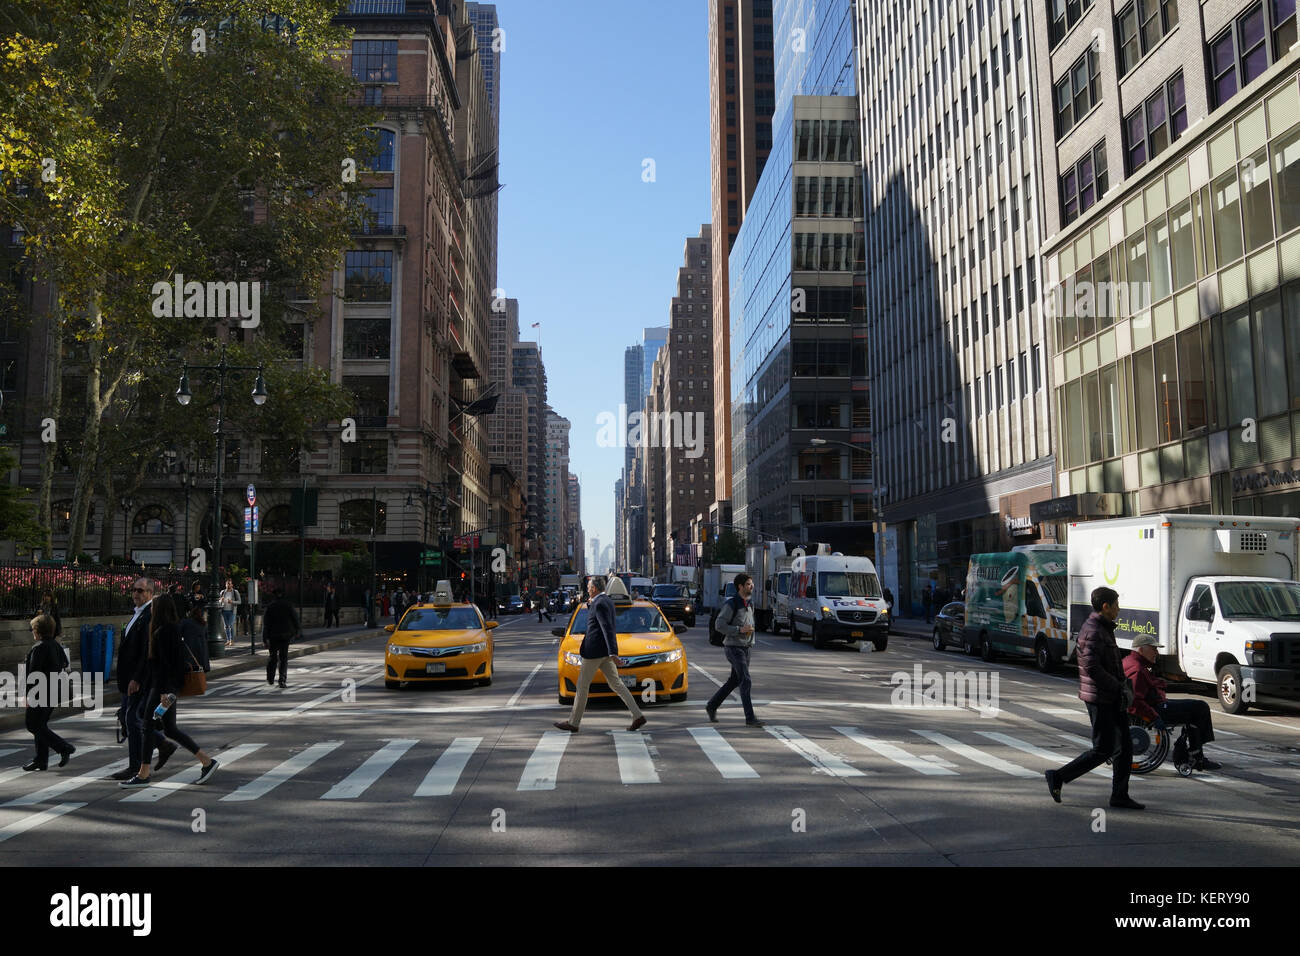 People crossing the street on 6th Avenue (Avenue of the Americas), New York City midtown Stock Photo